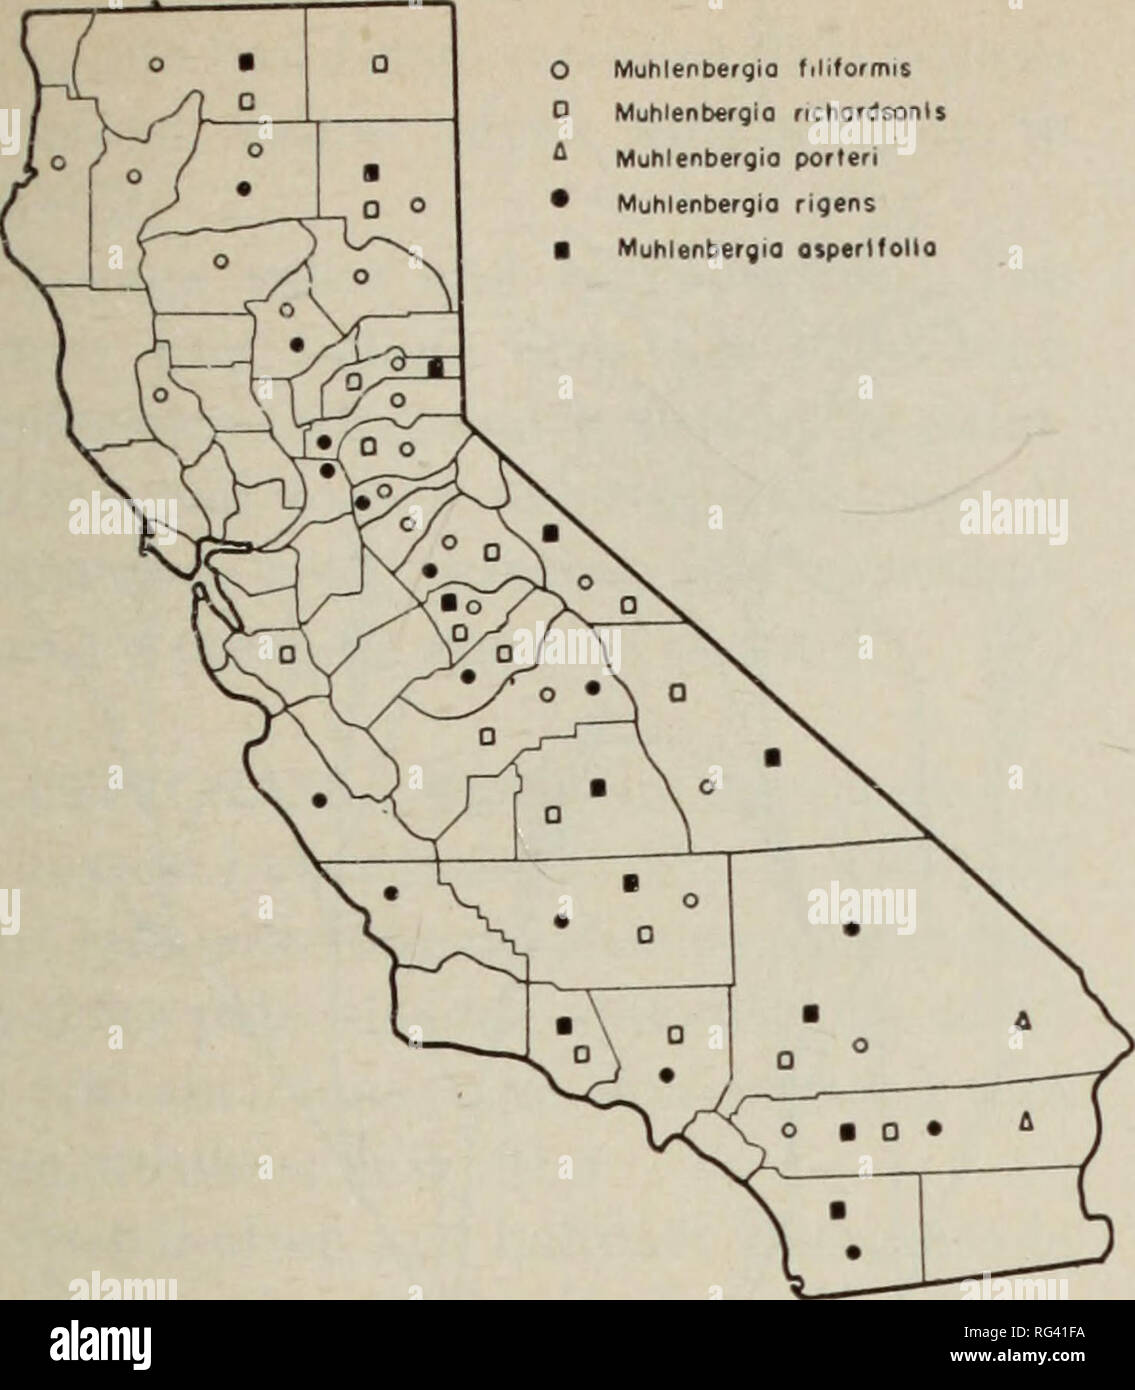 . California grasslands and range forage grasses. Grasses; Forage plants. Muhlenbergio filiformis Muhlenbergia richord6onlj Muhlenbergio porteri Muhlenbergio ngens Muhlenbergia otperlfolla. Fig. 88. Distribution of muhlygrasses (Muhlenbergia spp.). and several species are found in the high Sierras and in northern California. They seldom grow in pure stands and are usually scattered over a wide variety of life zones and soils. For example, in the desert areas muhlies frequently occur on light sandy soils, but sometimes grow in mountain meadows on deep, heavy adobe soils. Some species grow in da Stock Photo